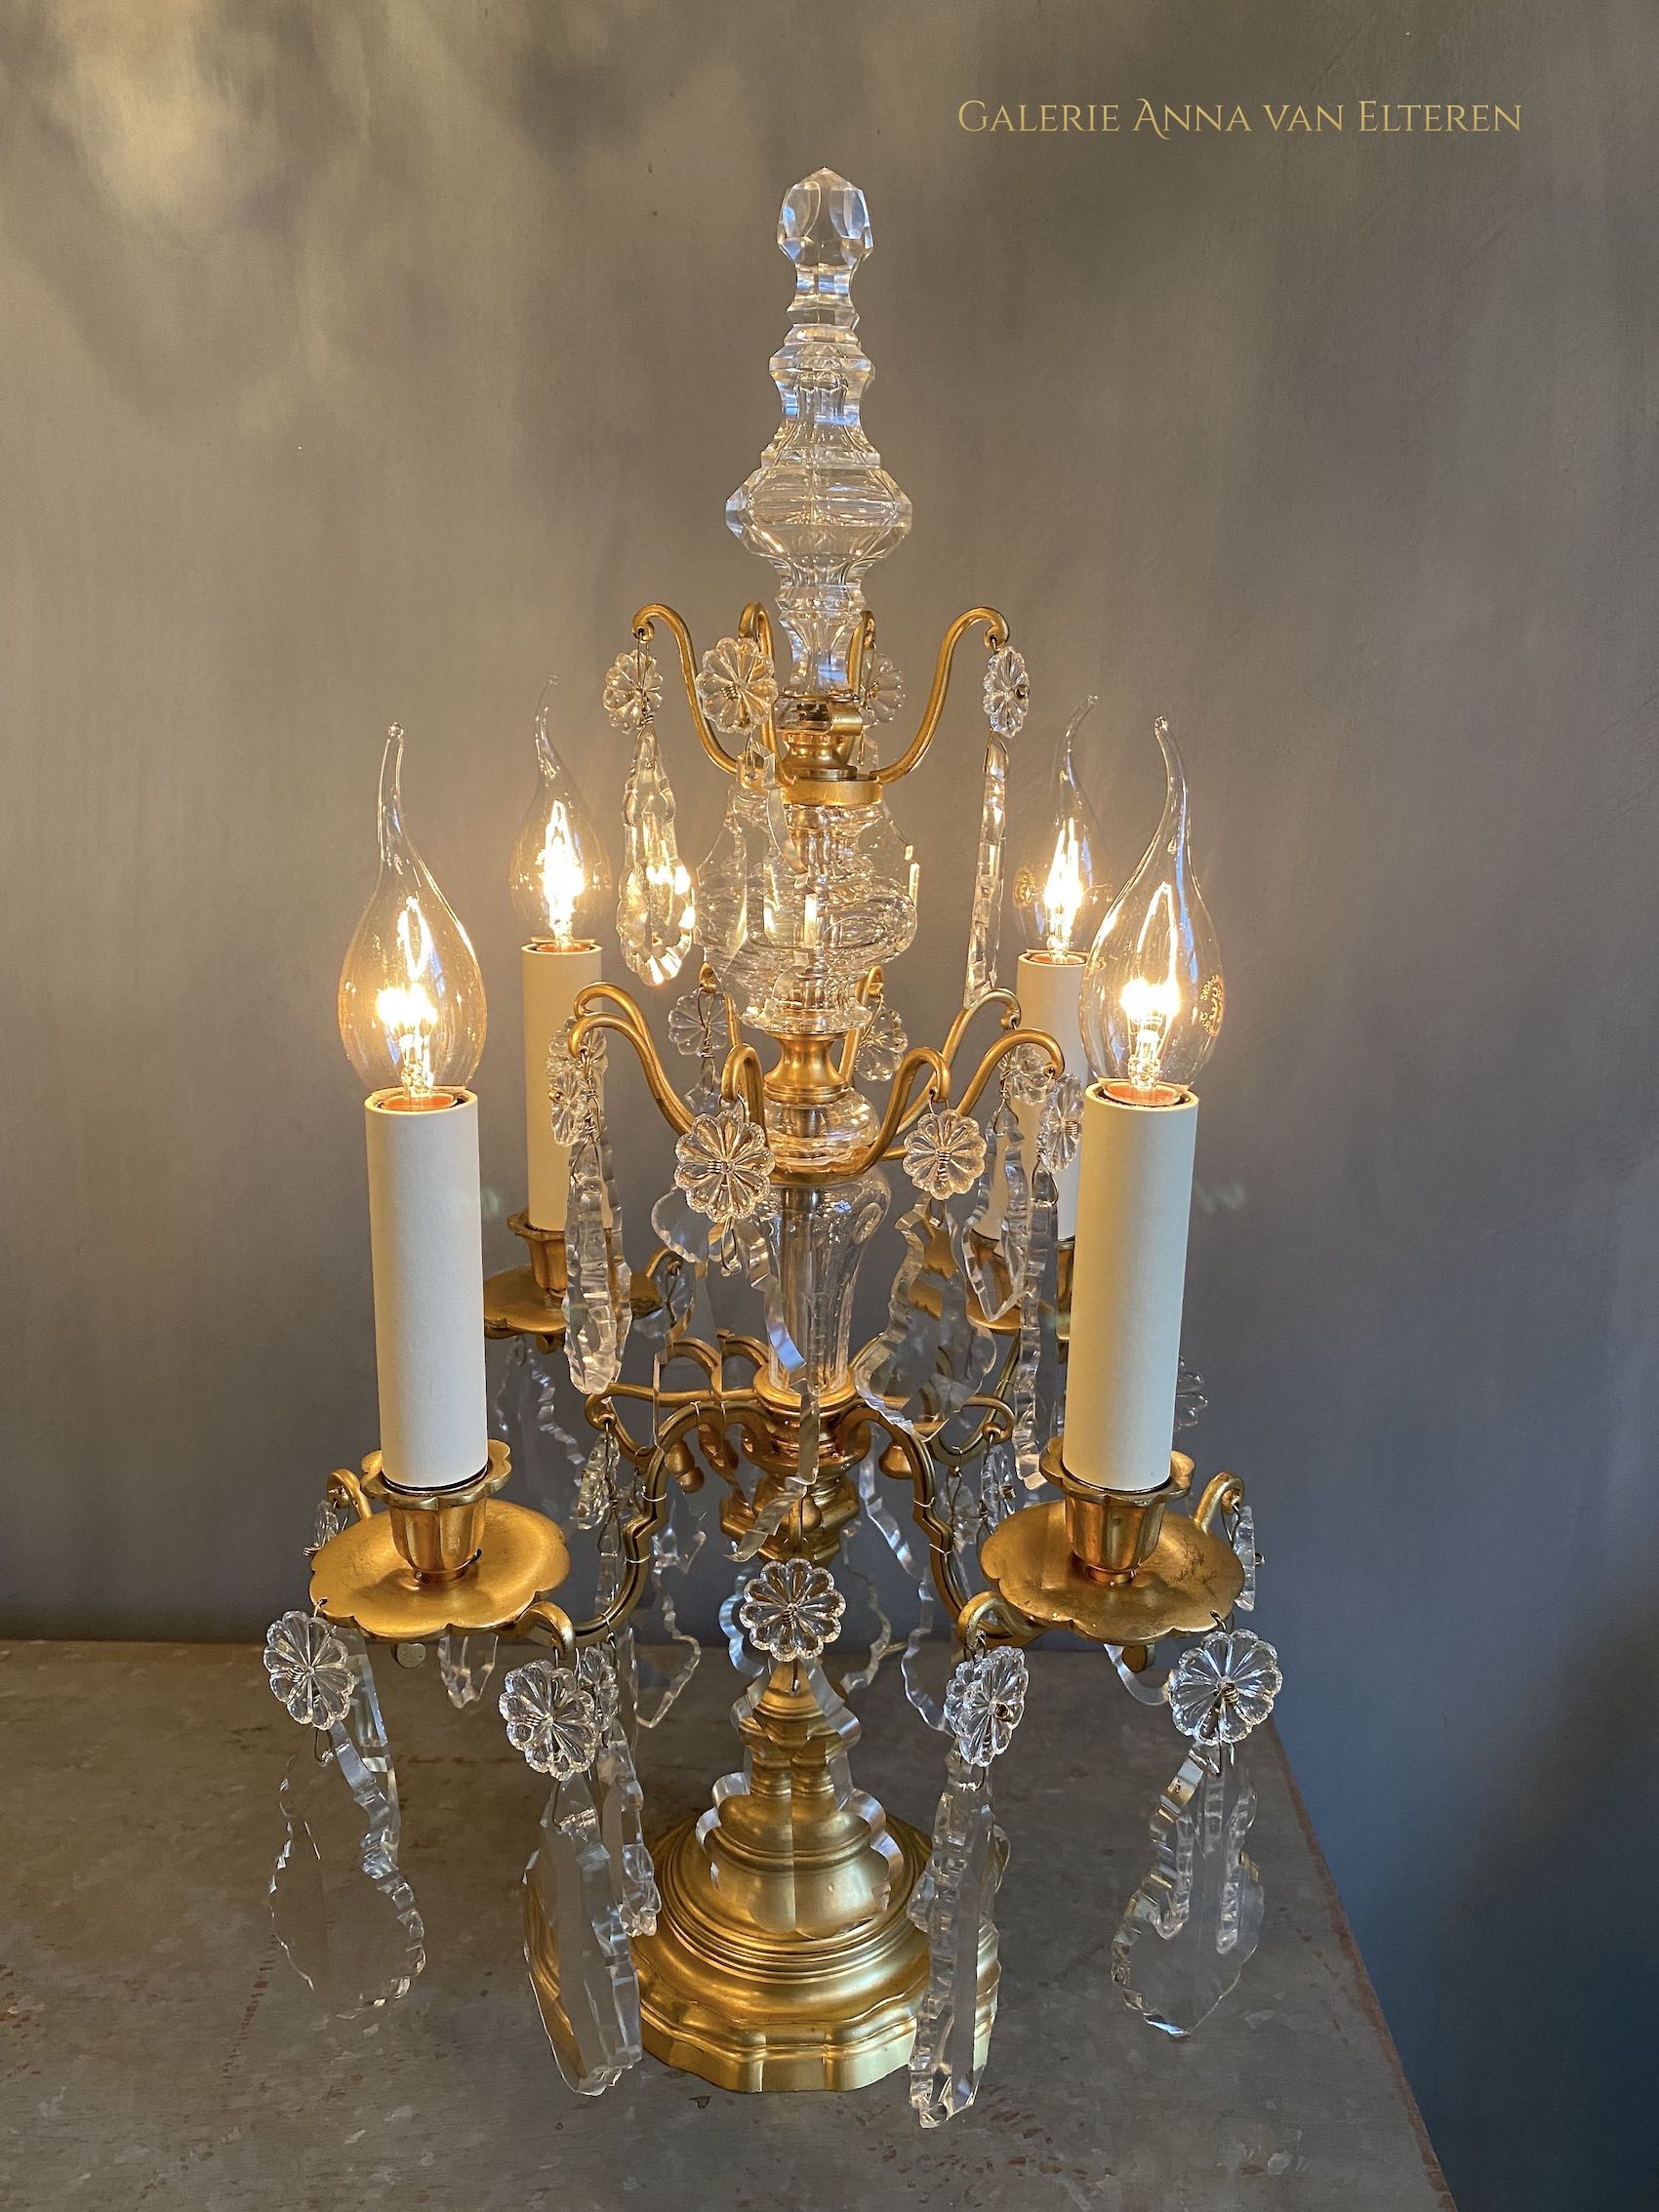 Pair of gilt bronze French girandoles in the style of Louis XV